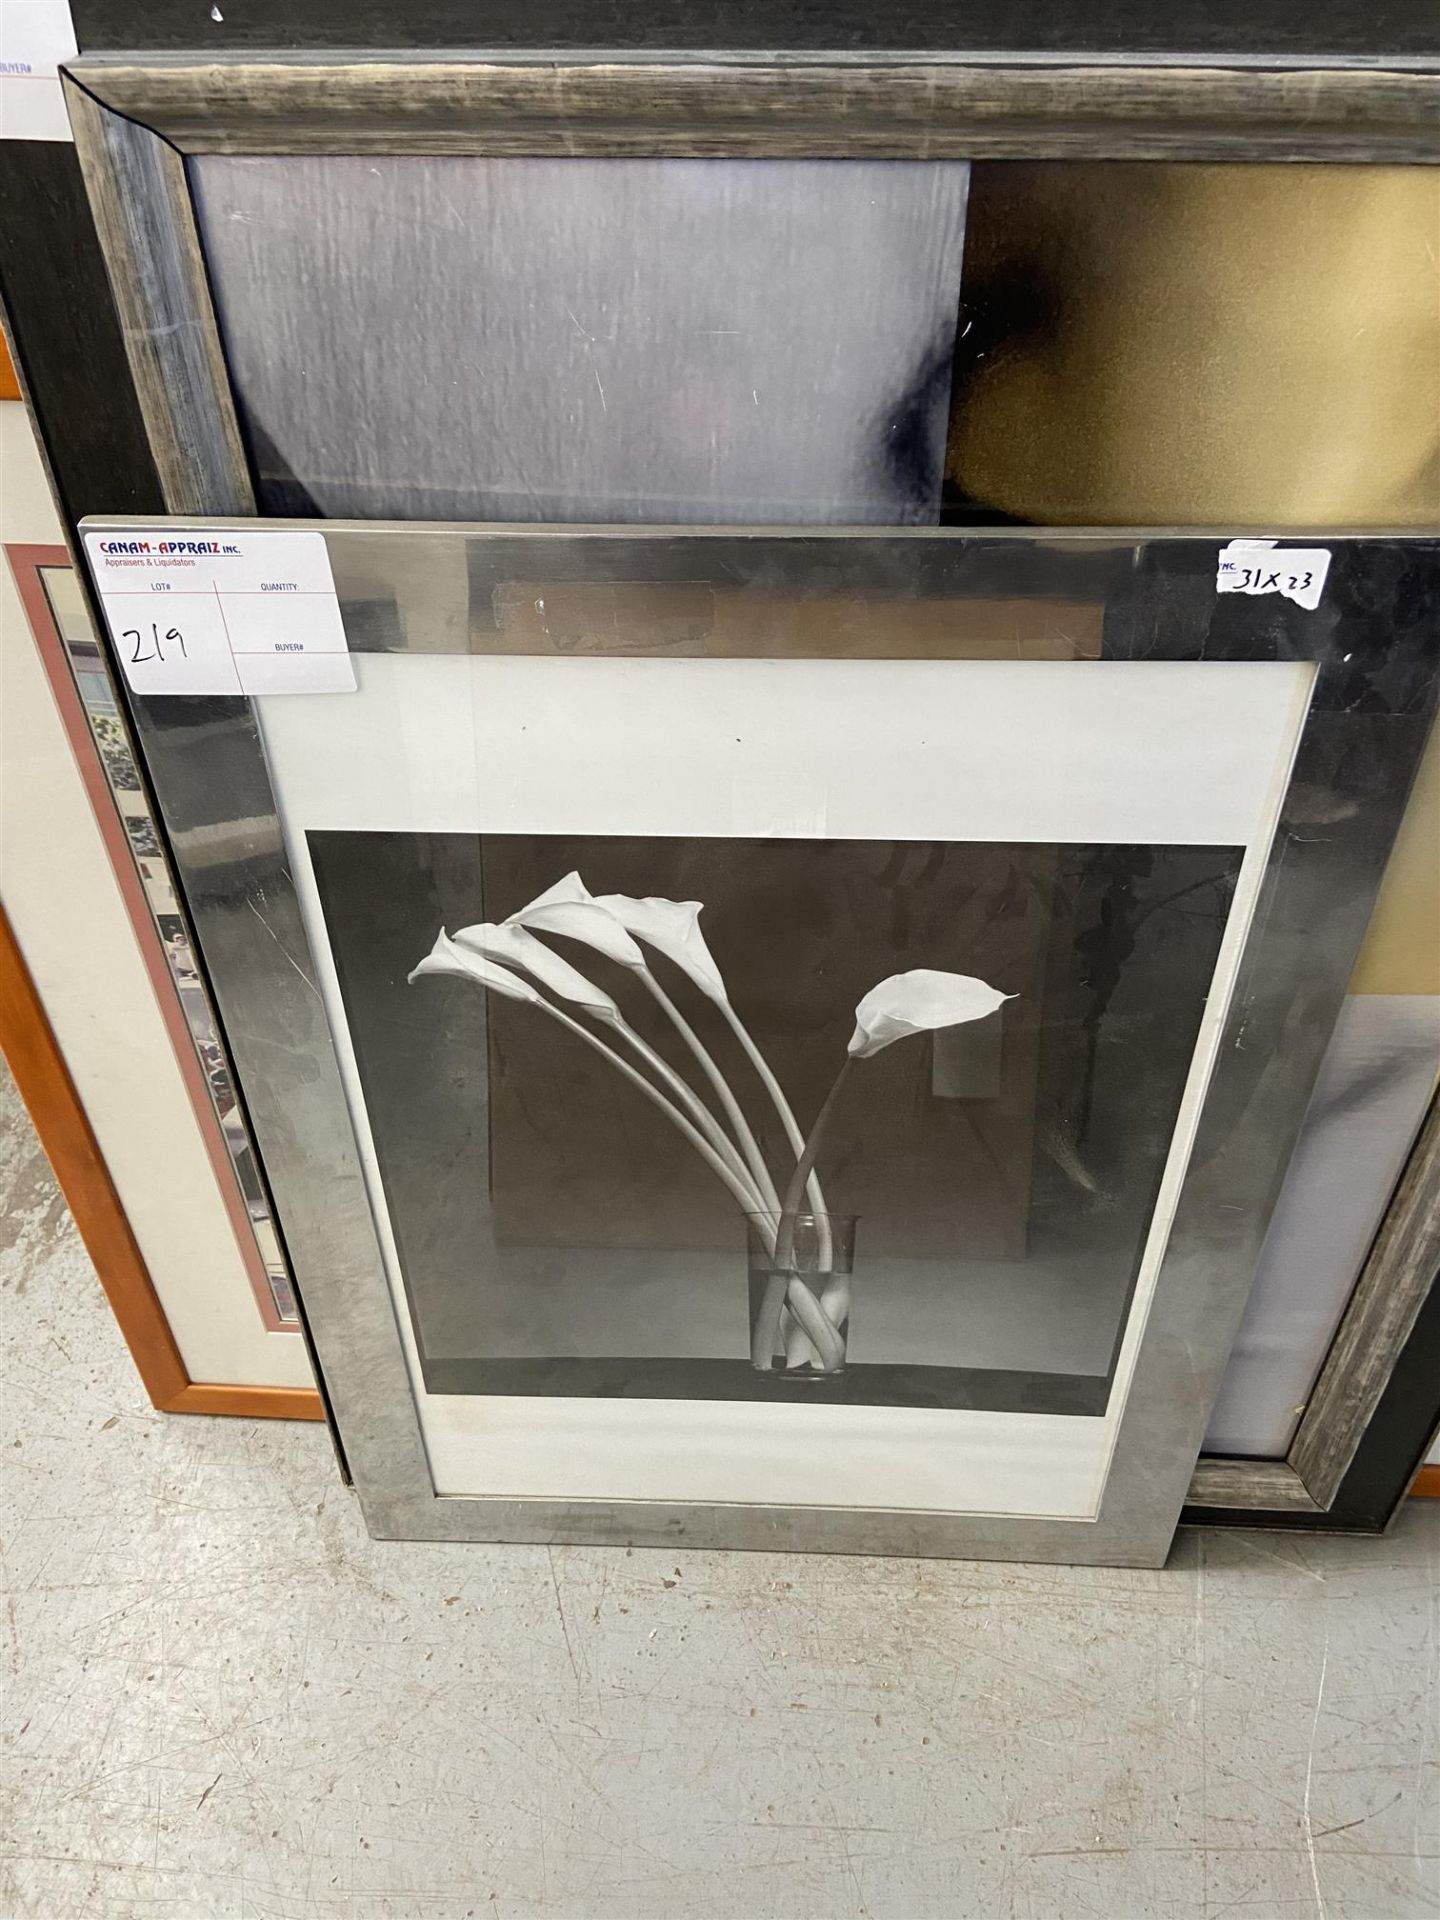 FLORAL BLAKC AND WHITE FRAMED PHOTO, 31X23